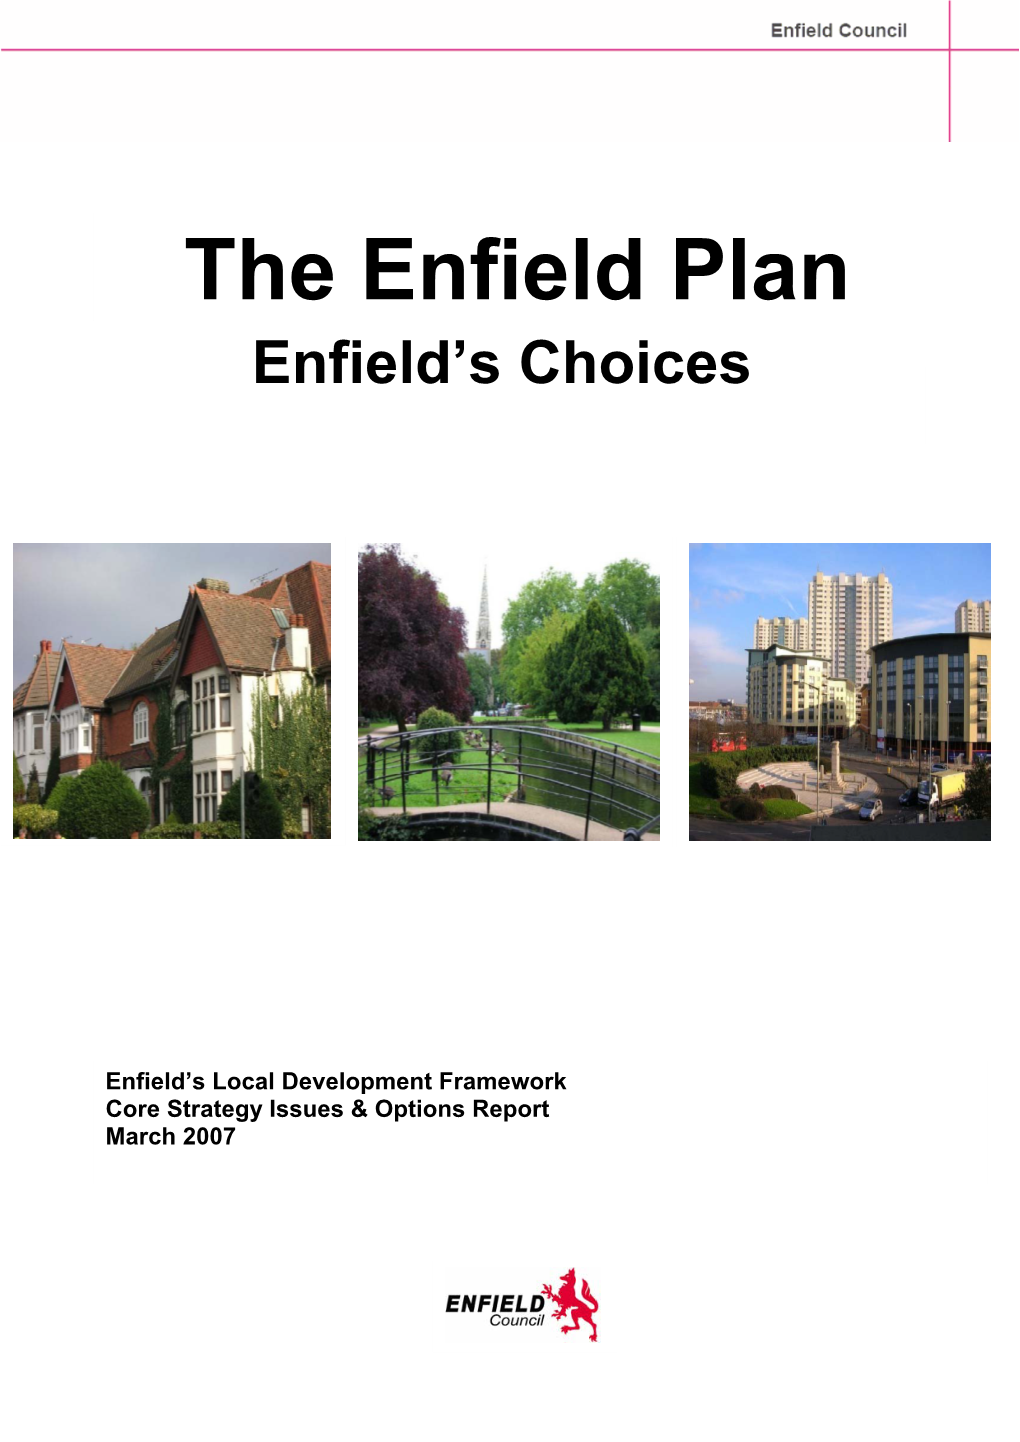 The Enfield Plan